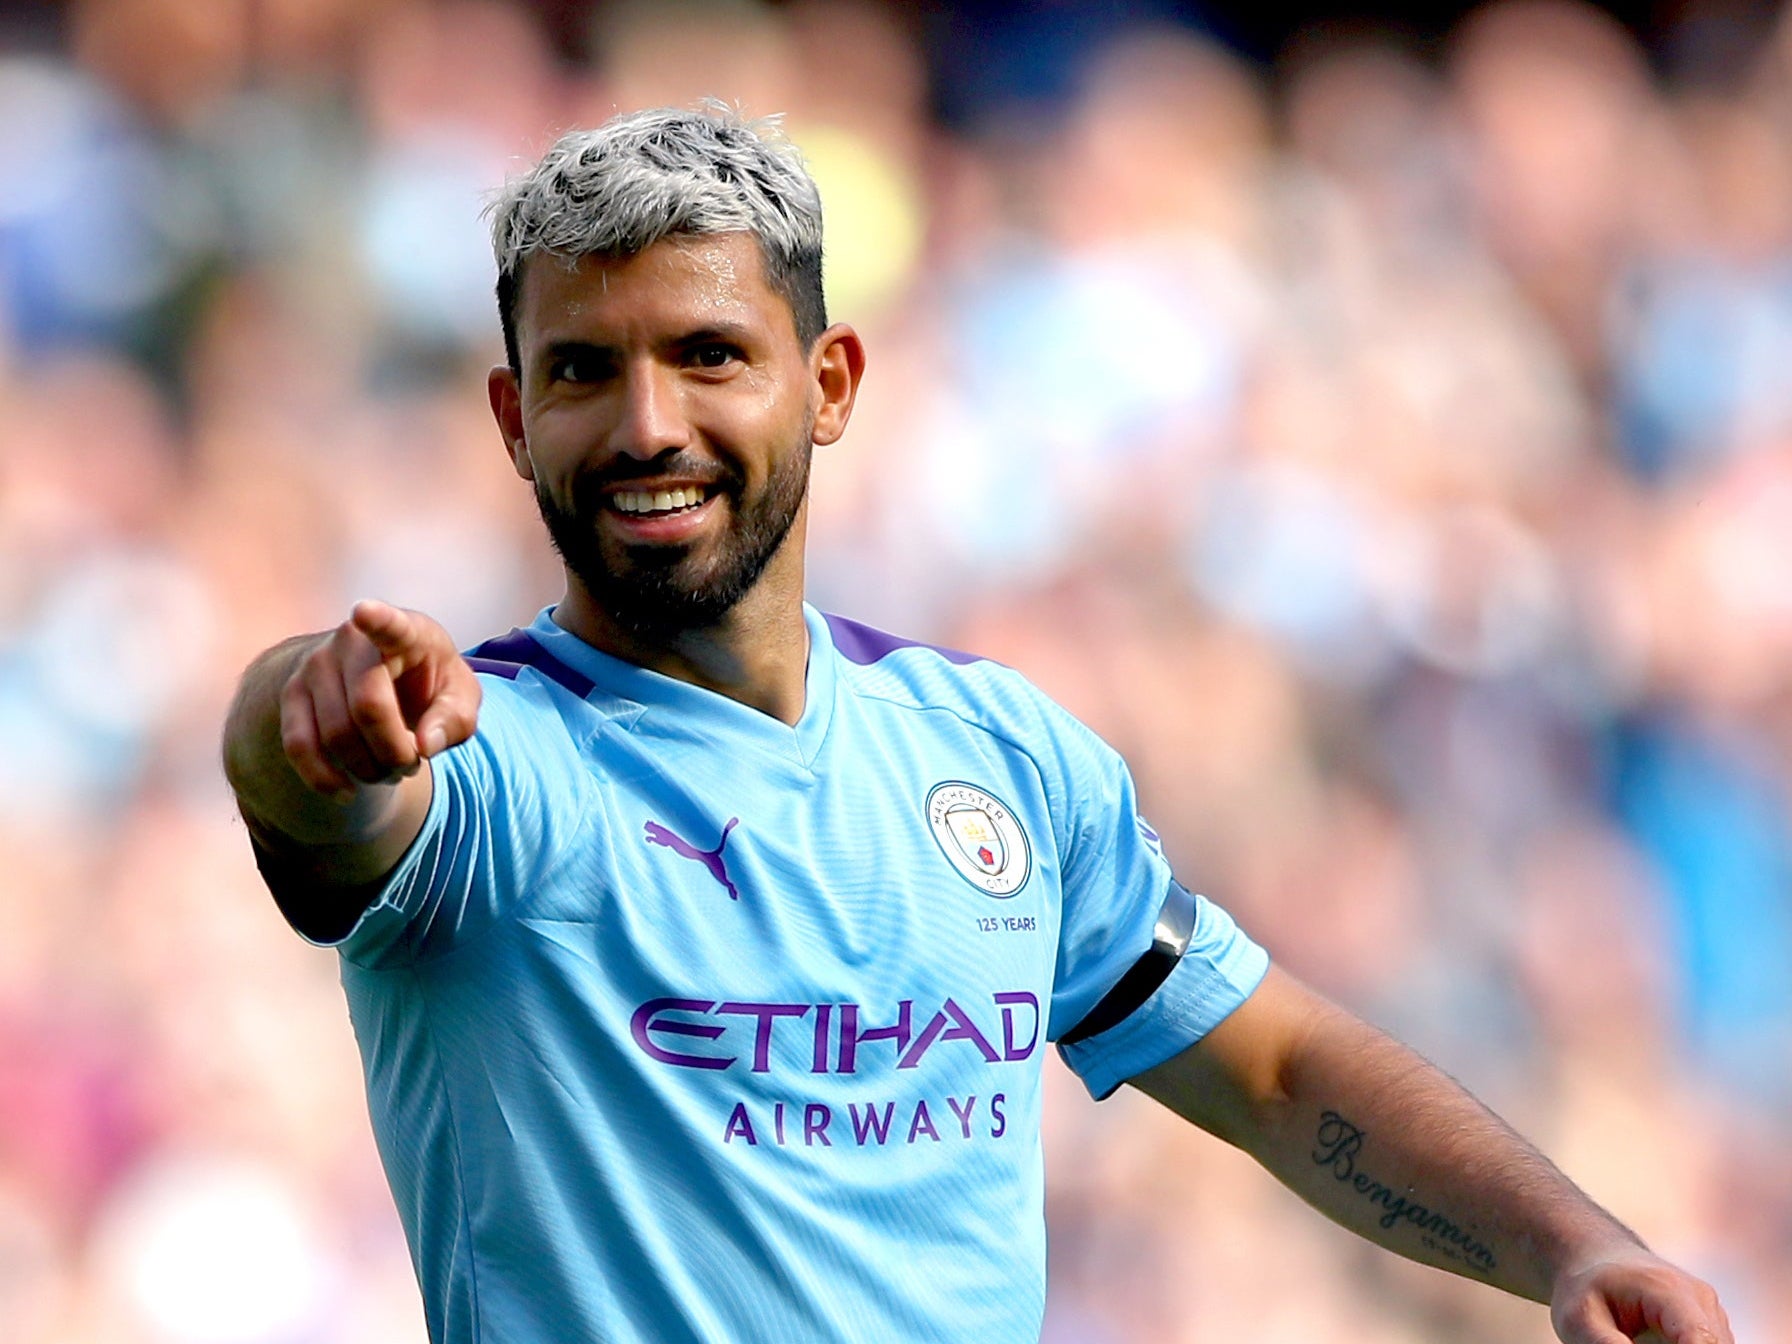 Sergio Aguero is set for one final Manchester City appearance at the Etihad Stadium